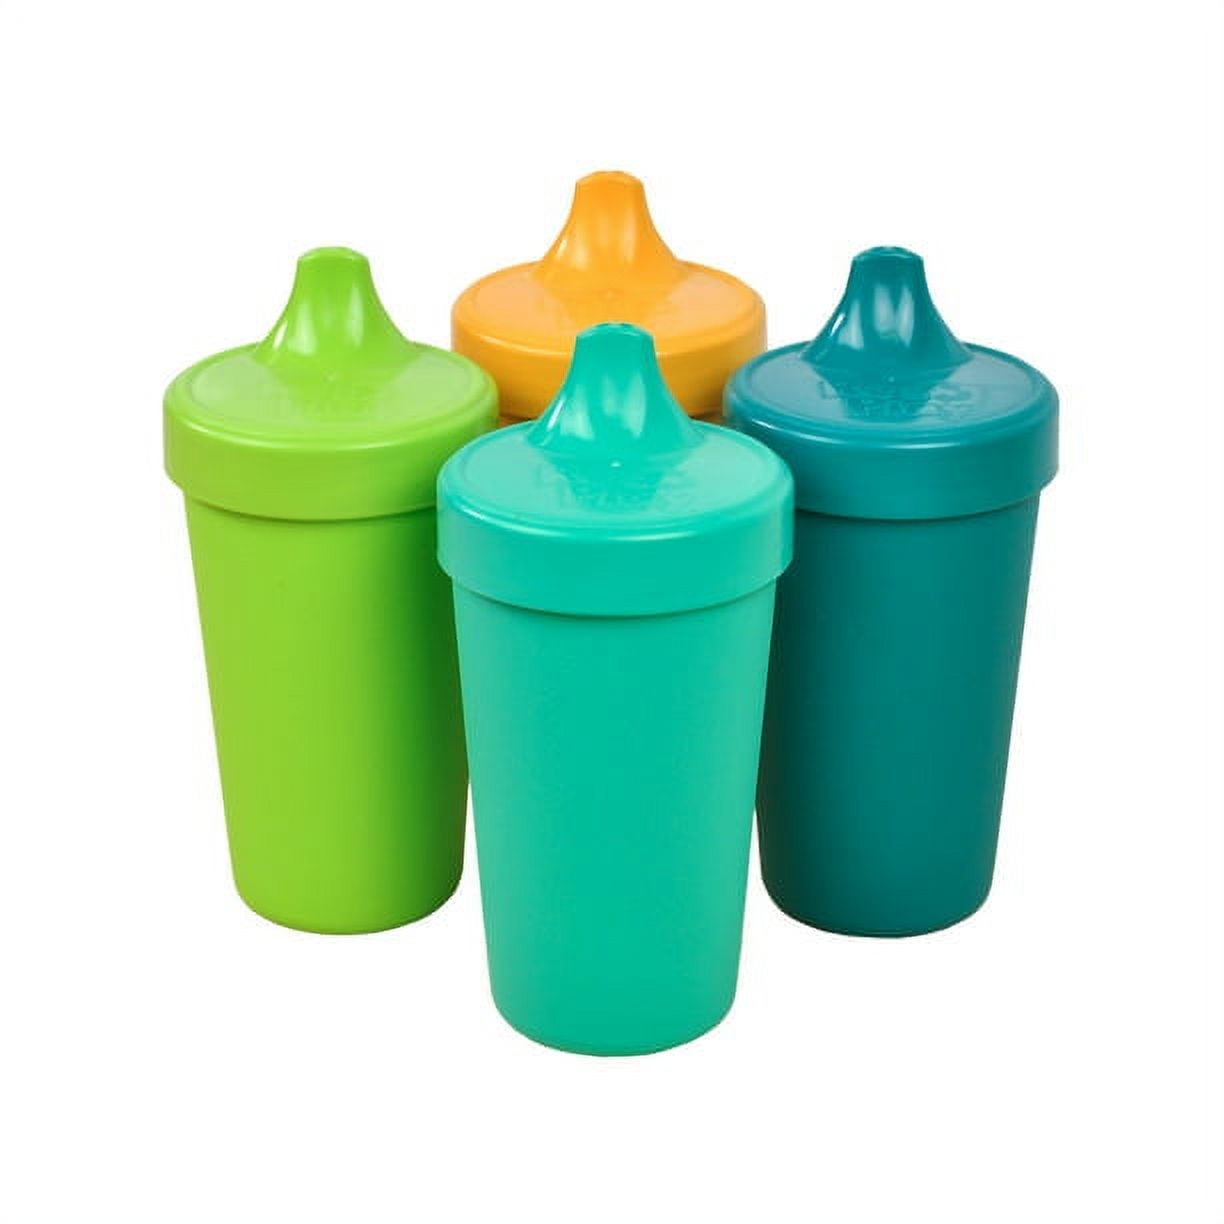 Re-Play Made in The USA No Spill Sippy Cups for Baby, Toddler, and